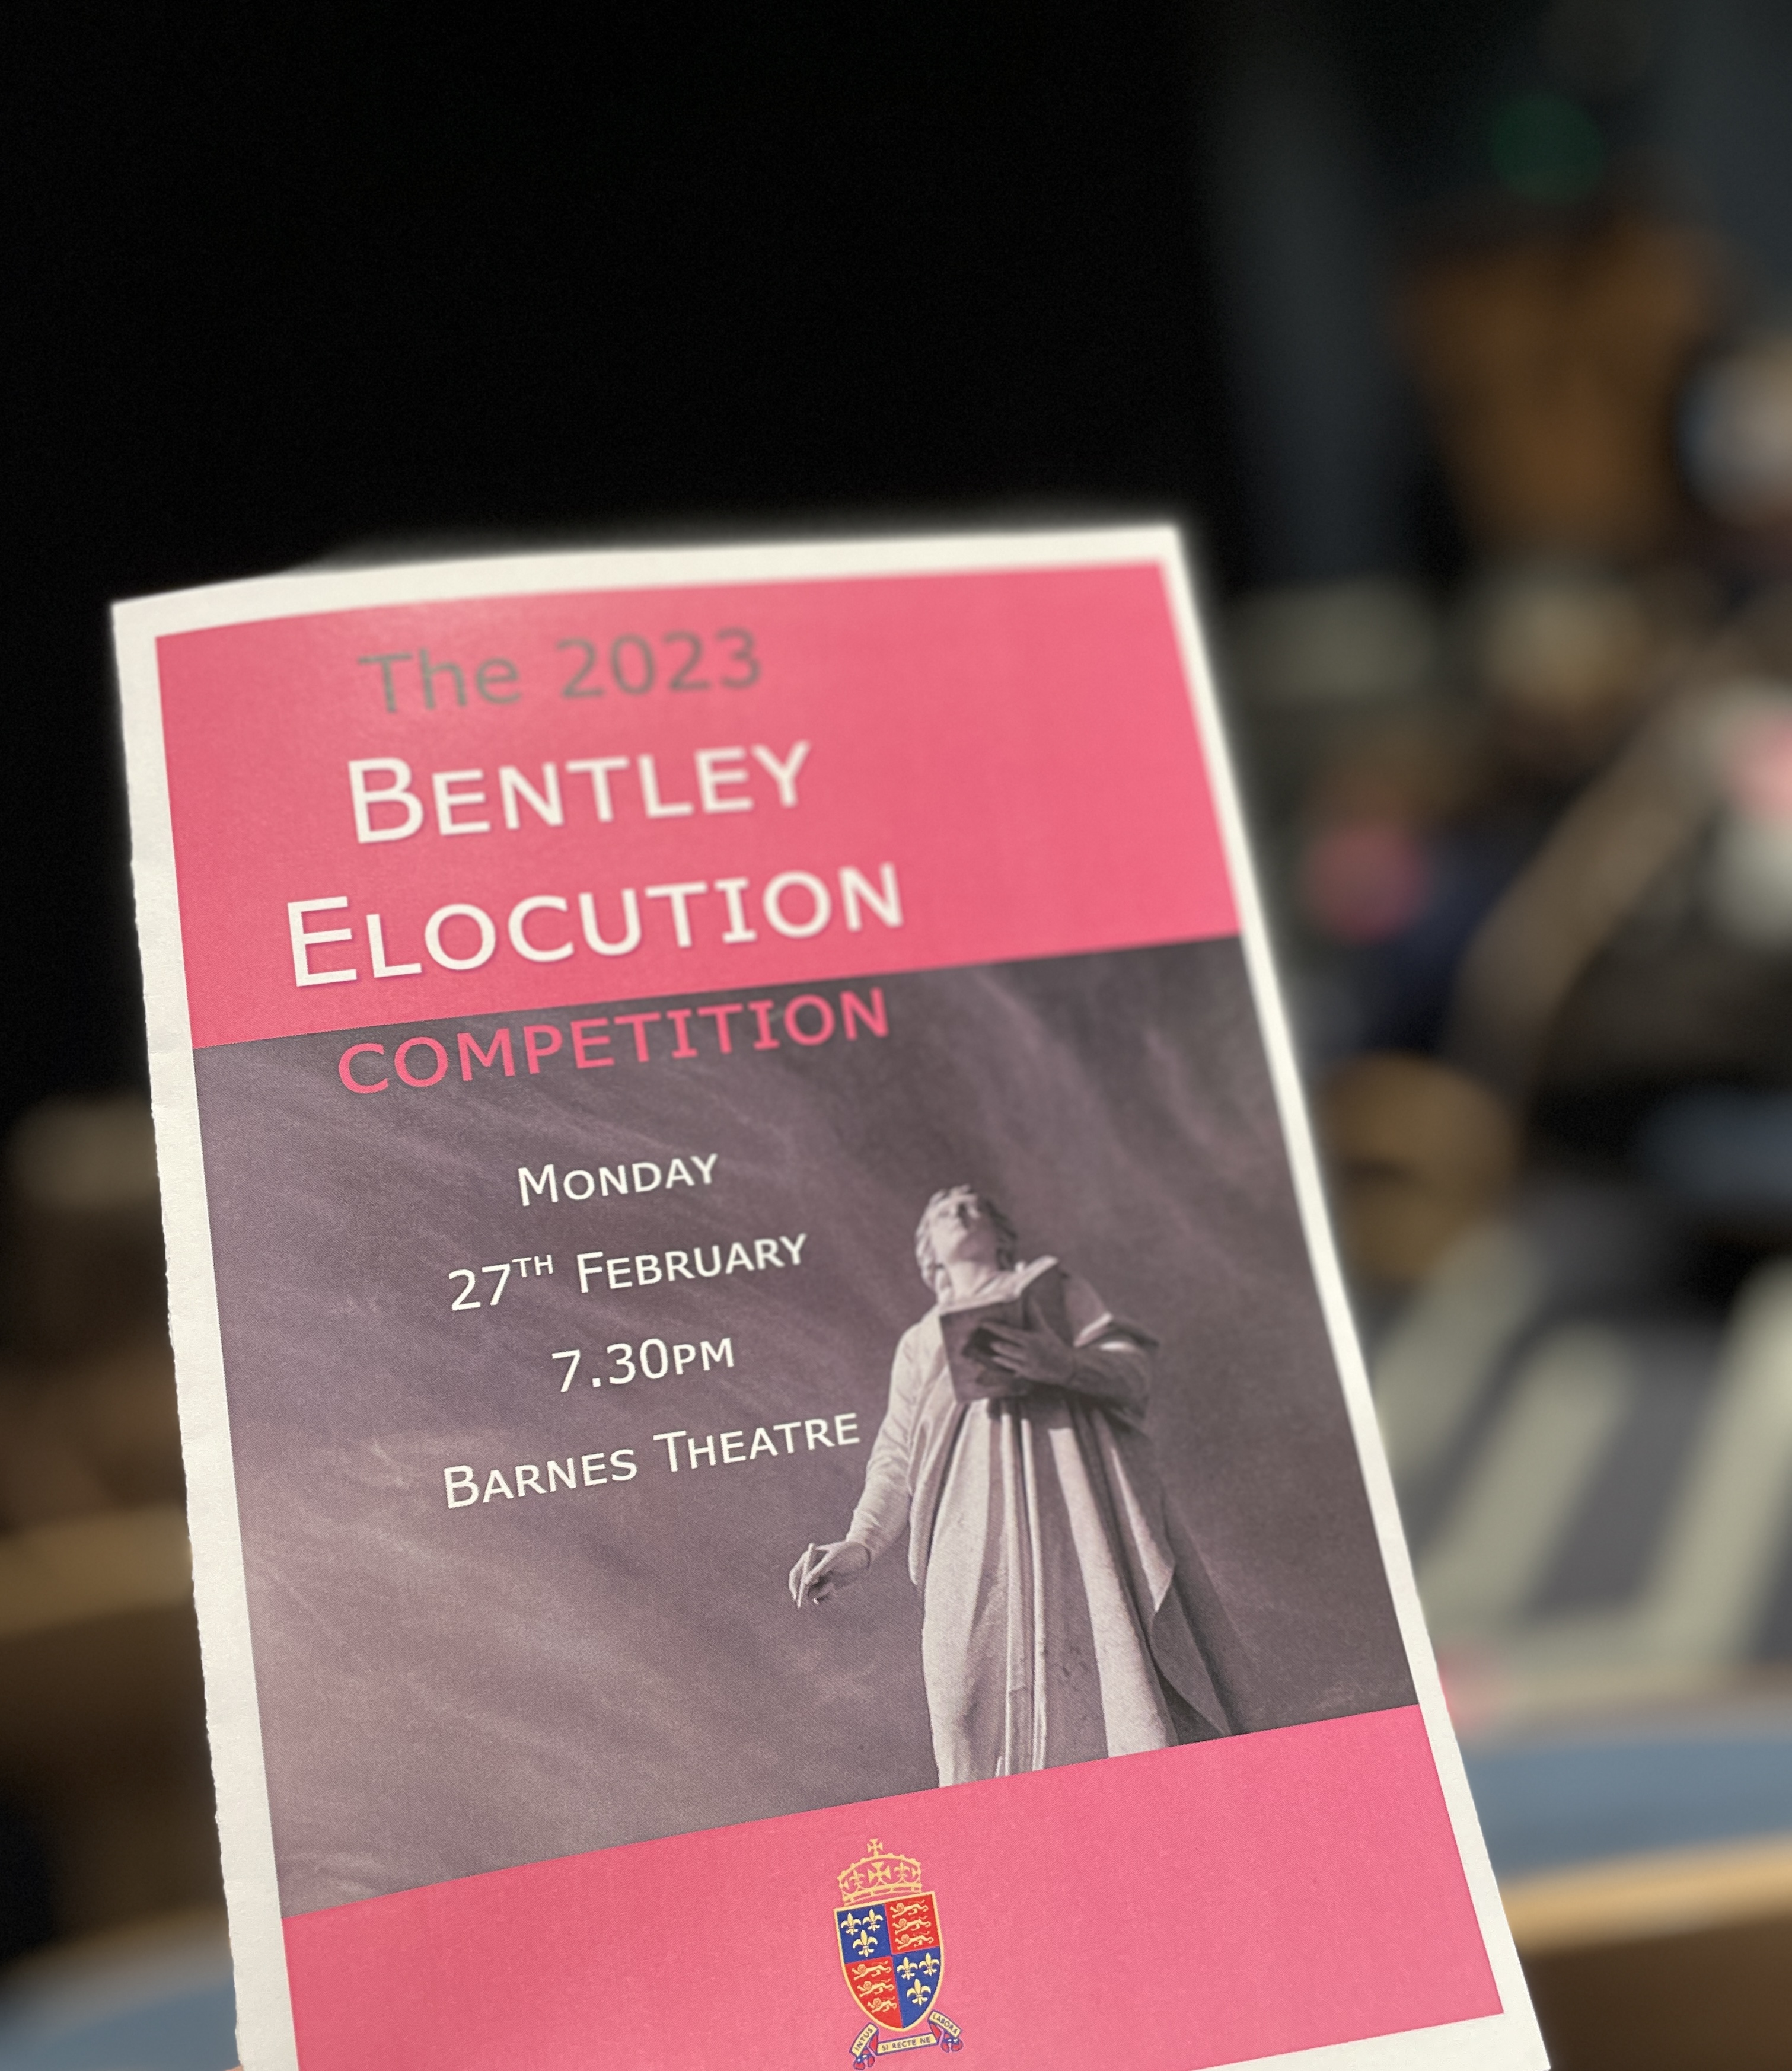 Poems spanning the centuries recited at this year's Bentley Elocution Competition 